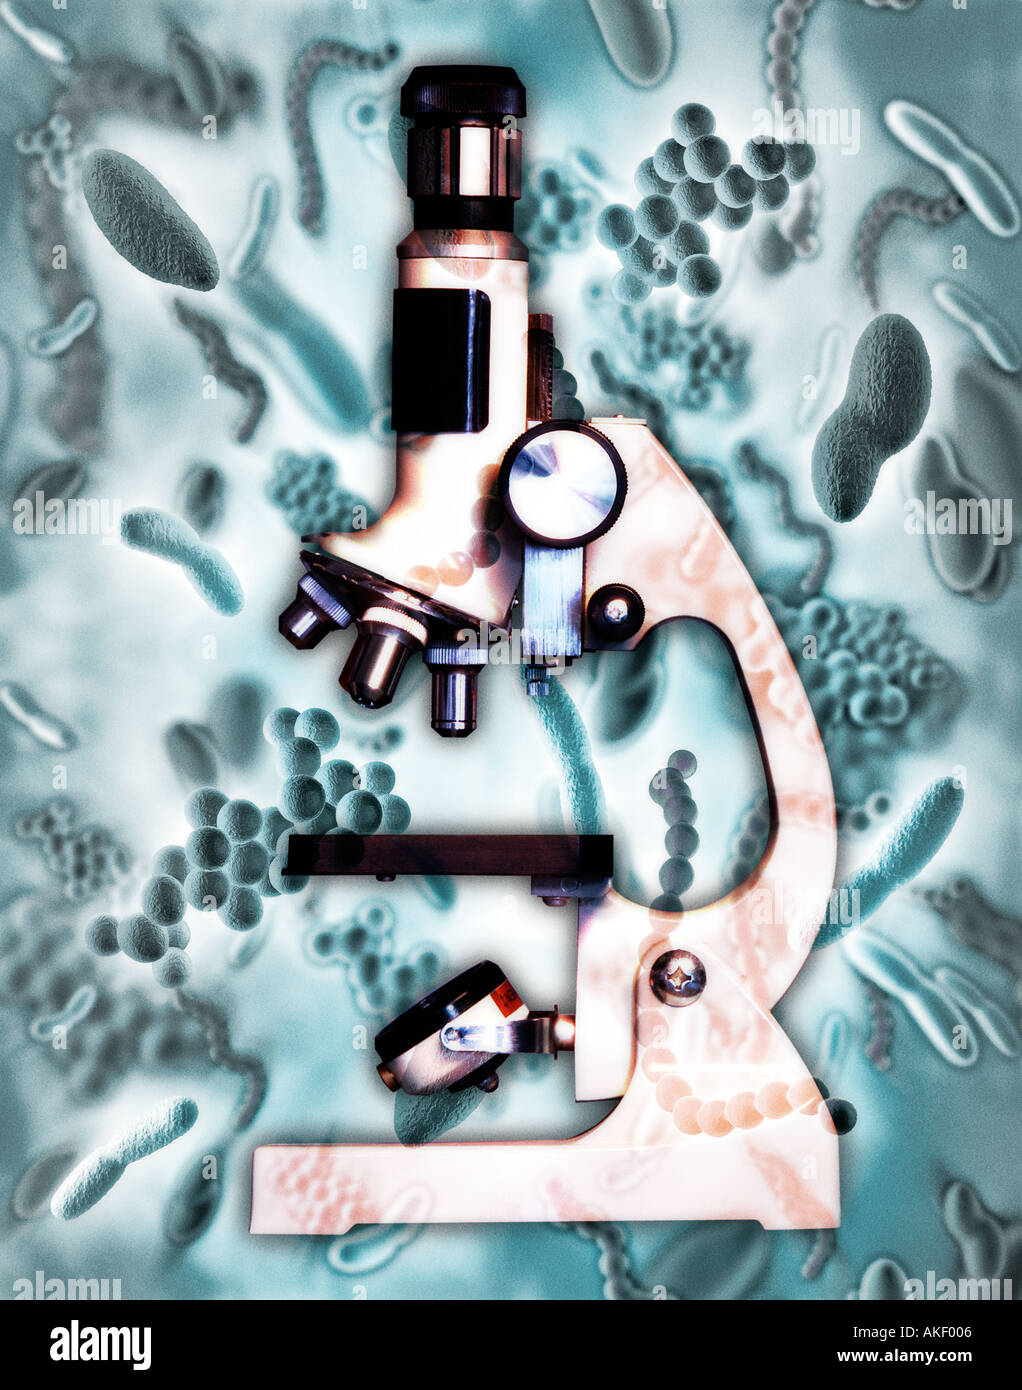 bacteria and virus with microscope symbol of research Stock Photo